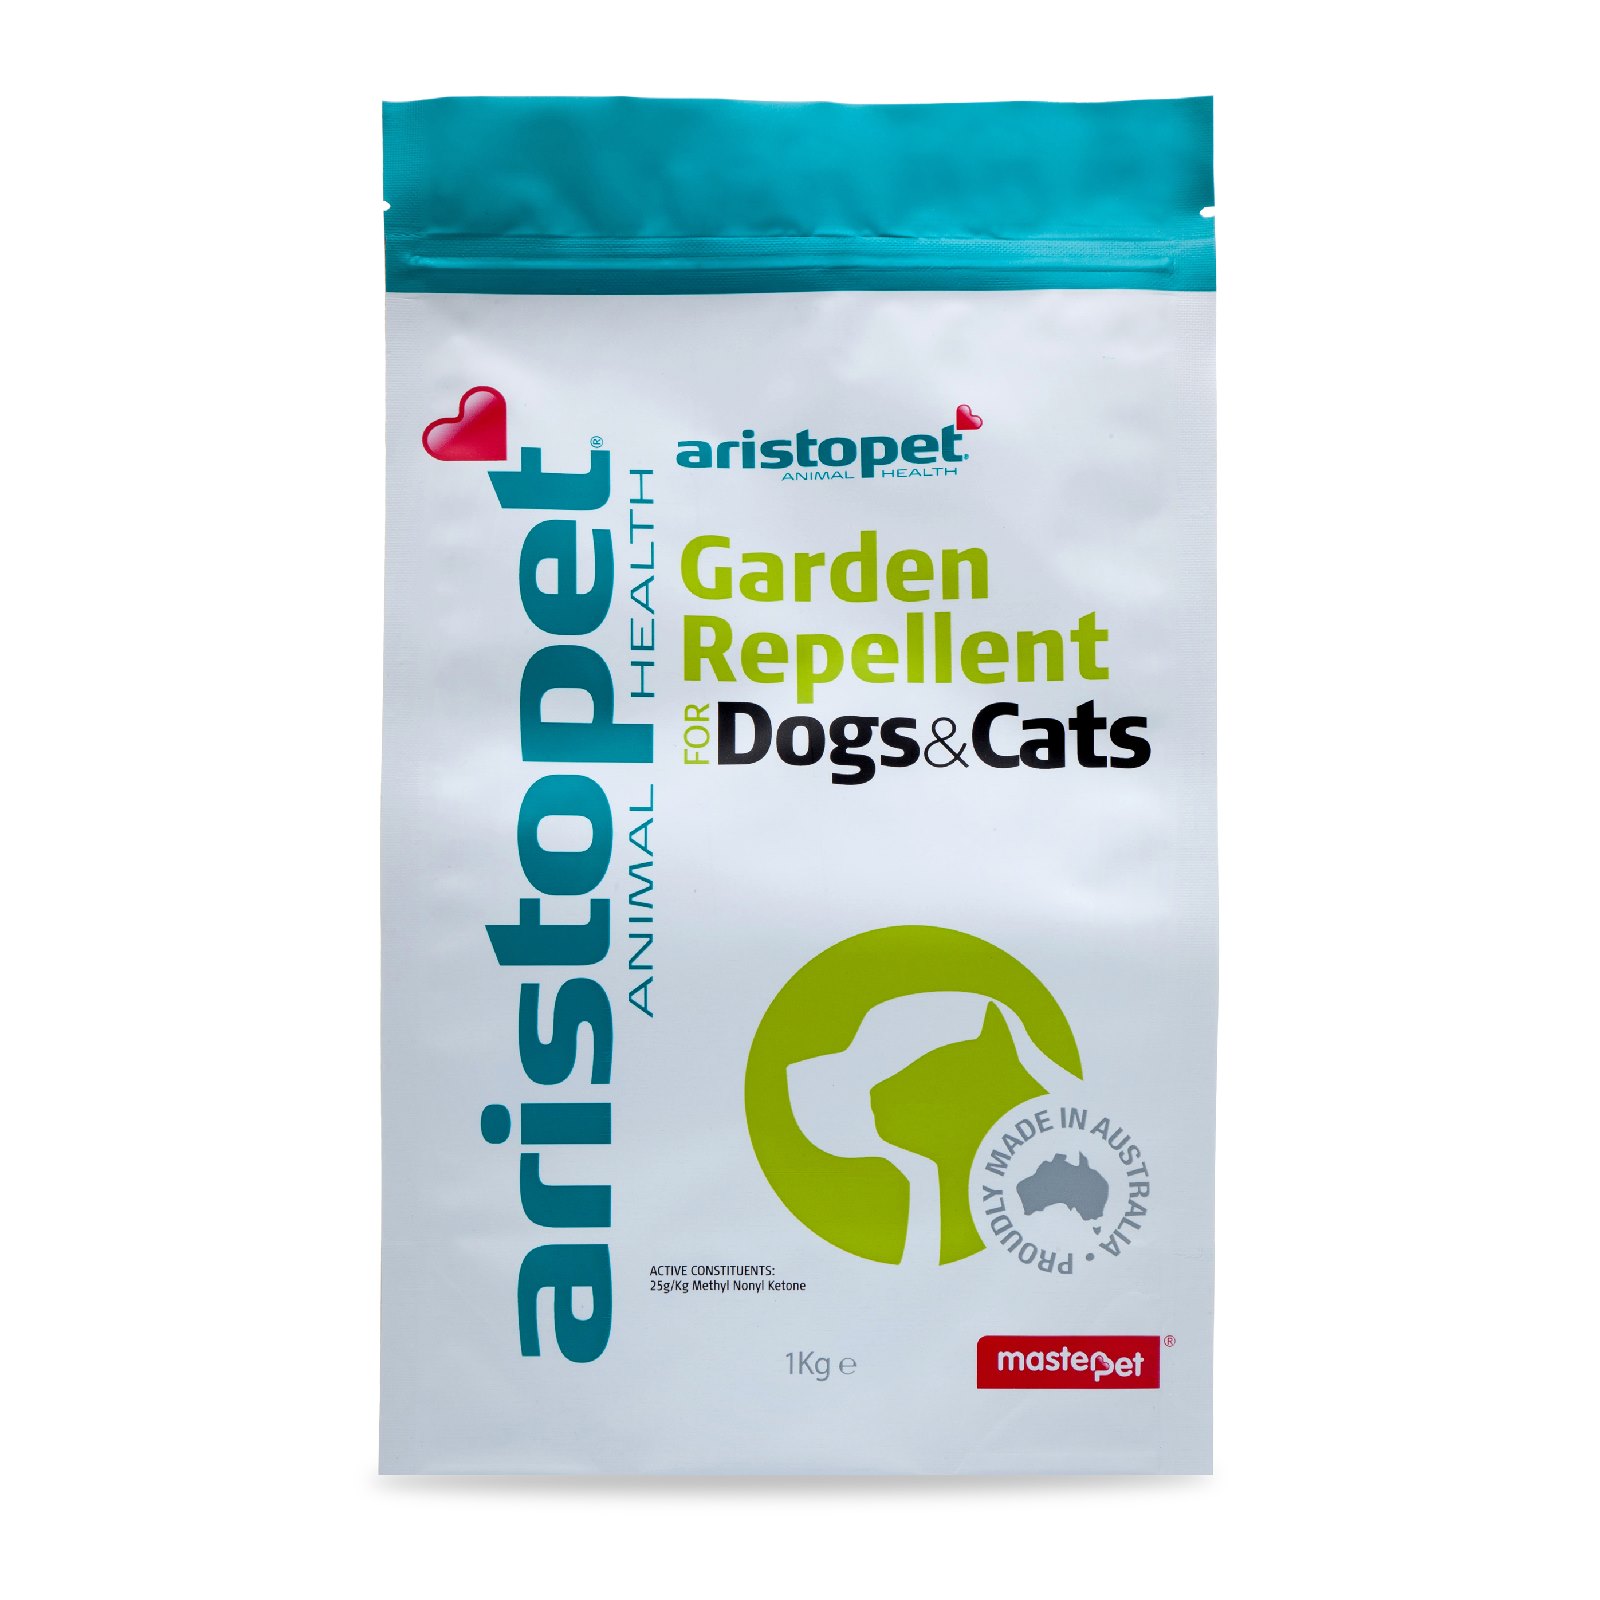 Aristopet Non-Toxic Garden Repellant Granules for Cats & Dogs - 400g/1kg image 0